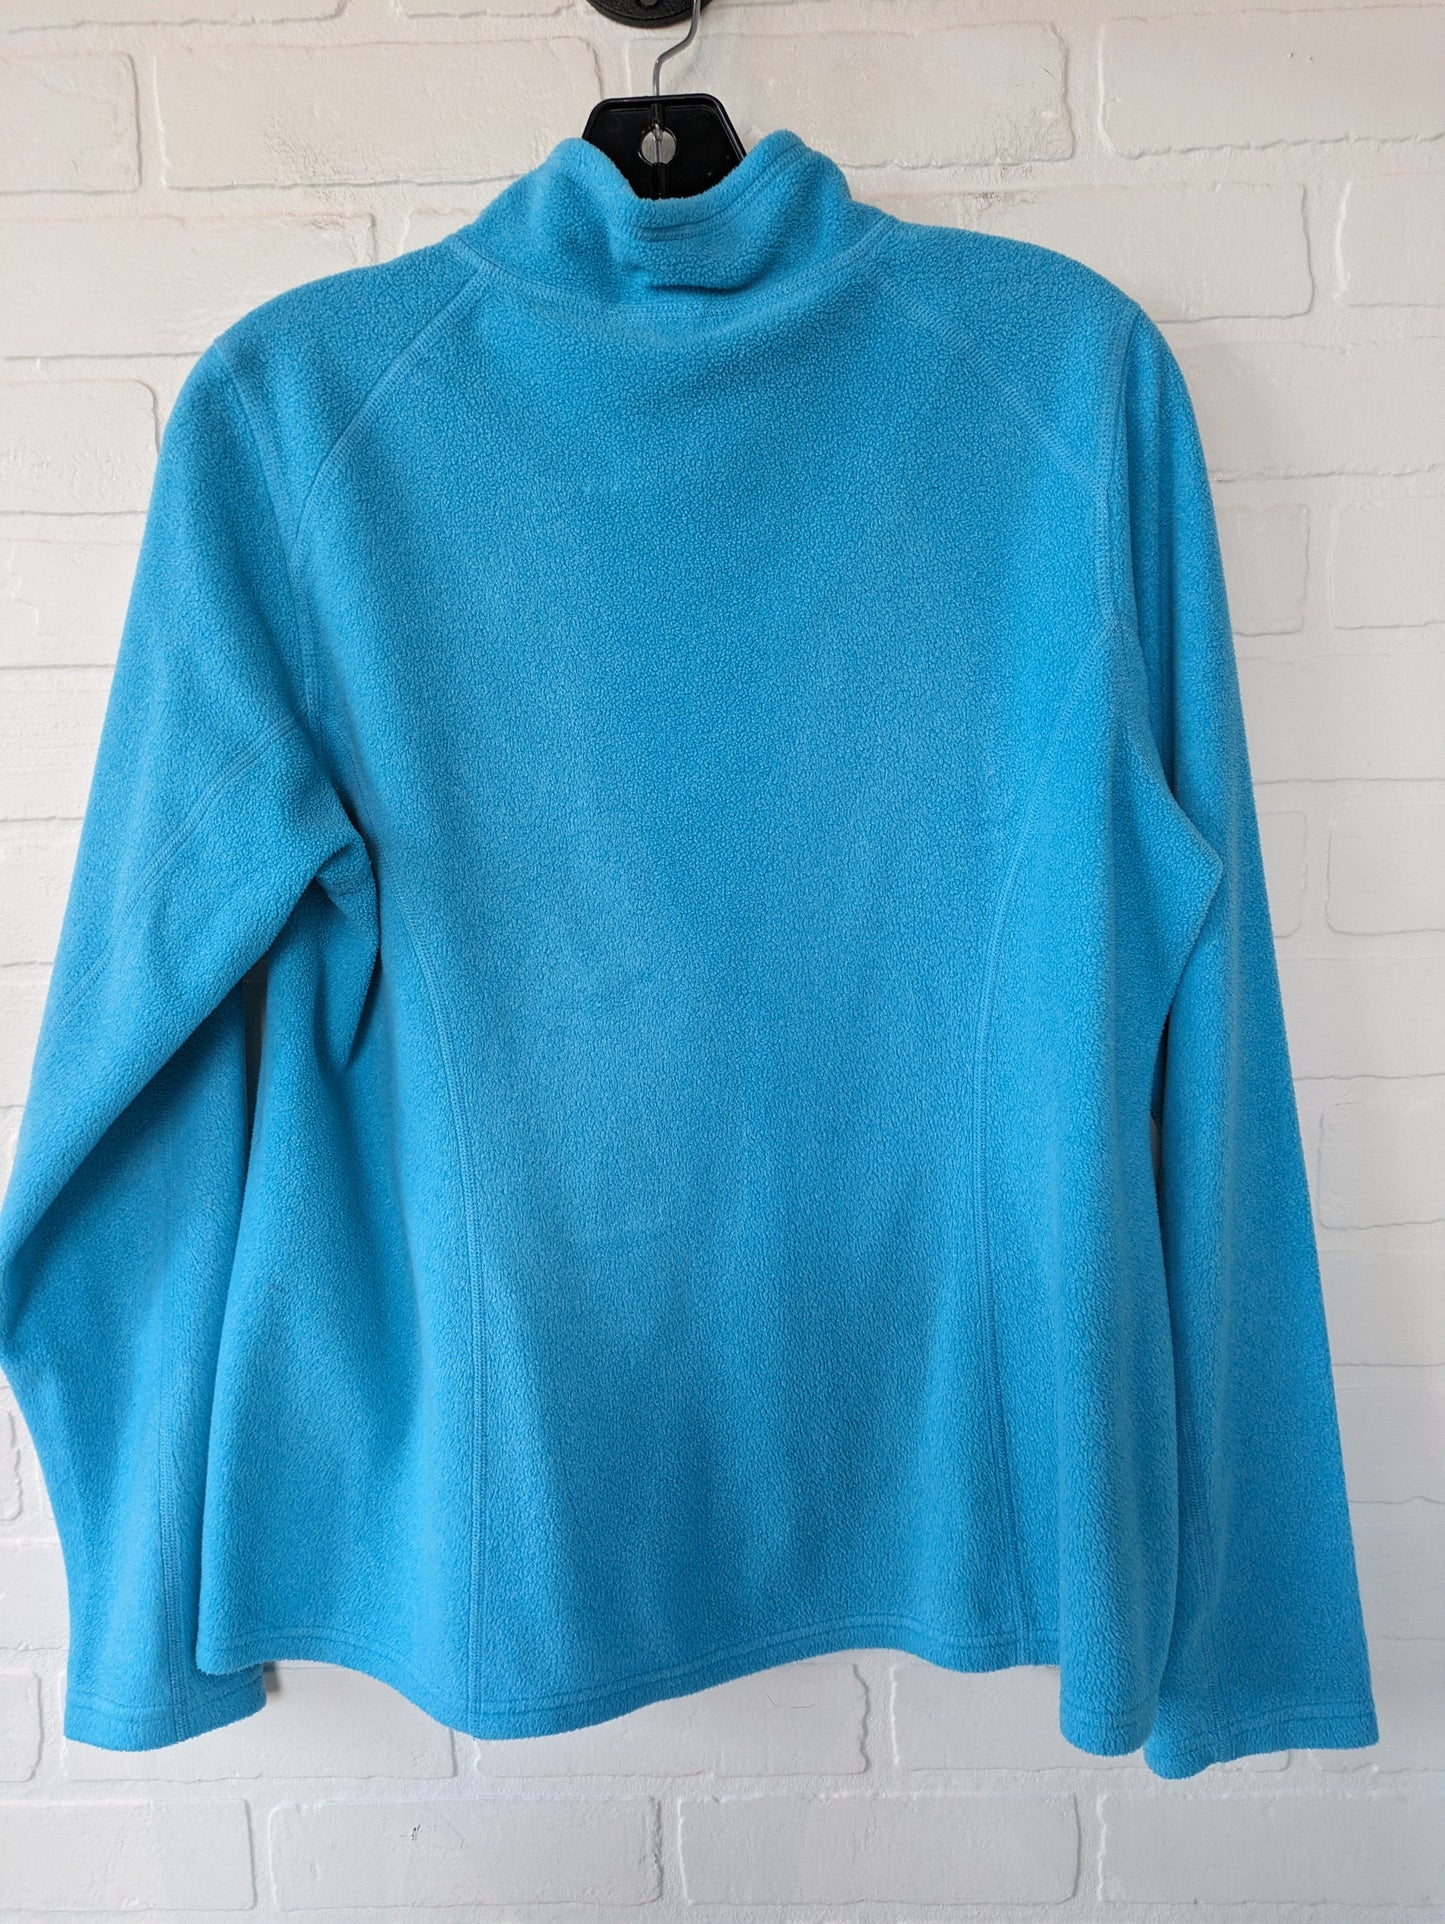 Blue Athletic Top Long Sleeve Collar The North Face, Size L